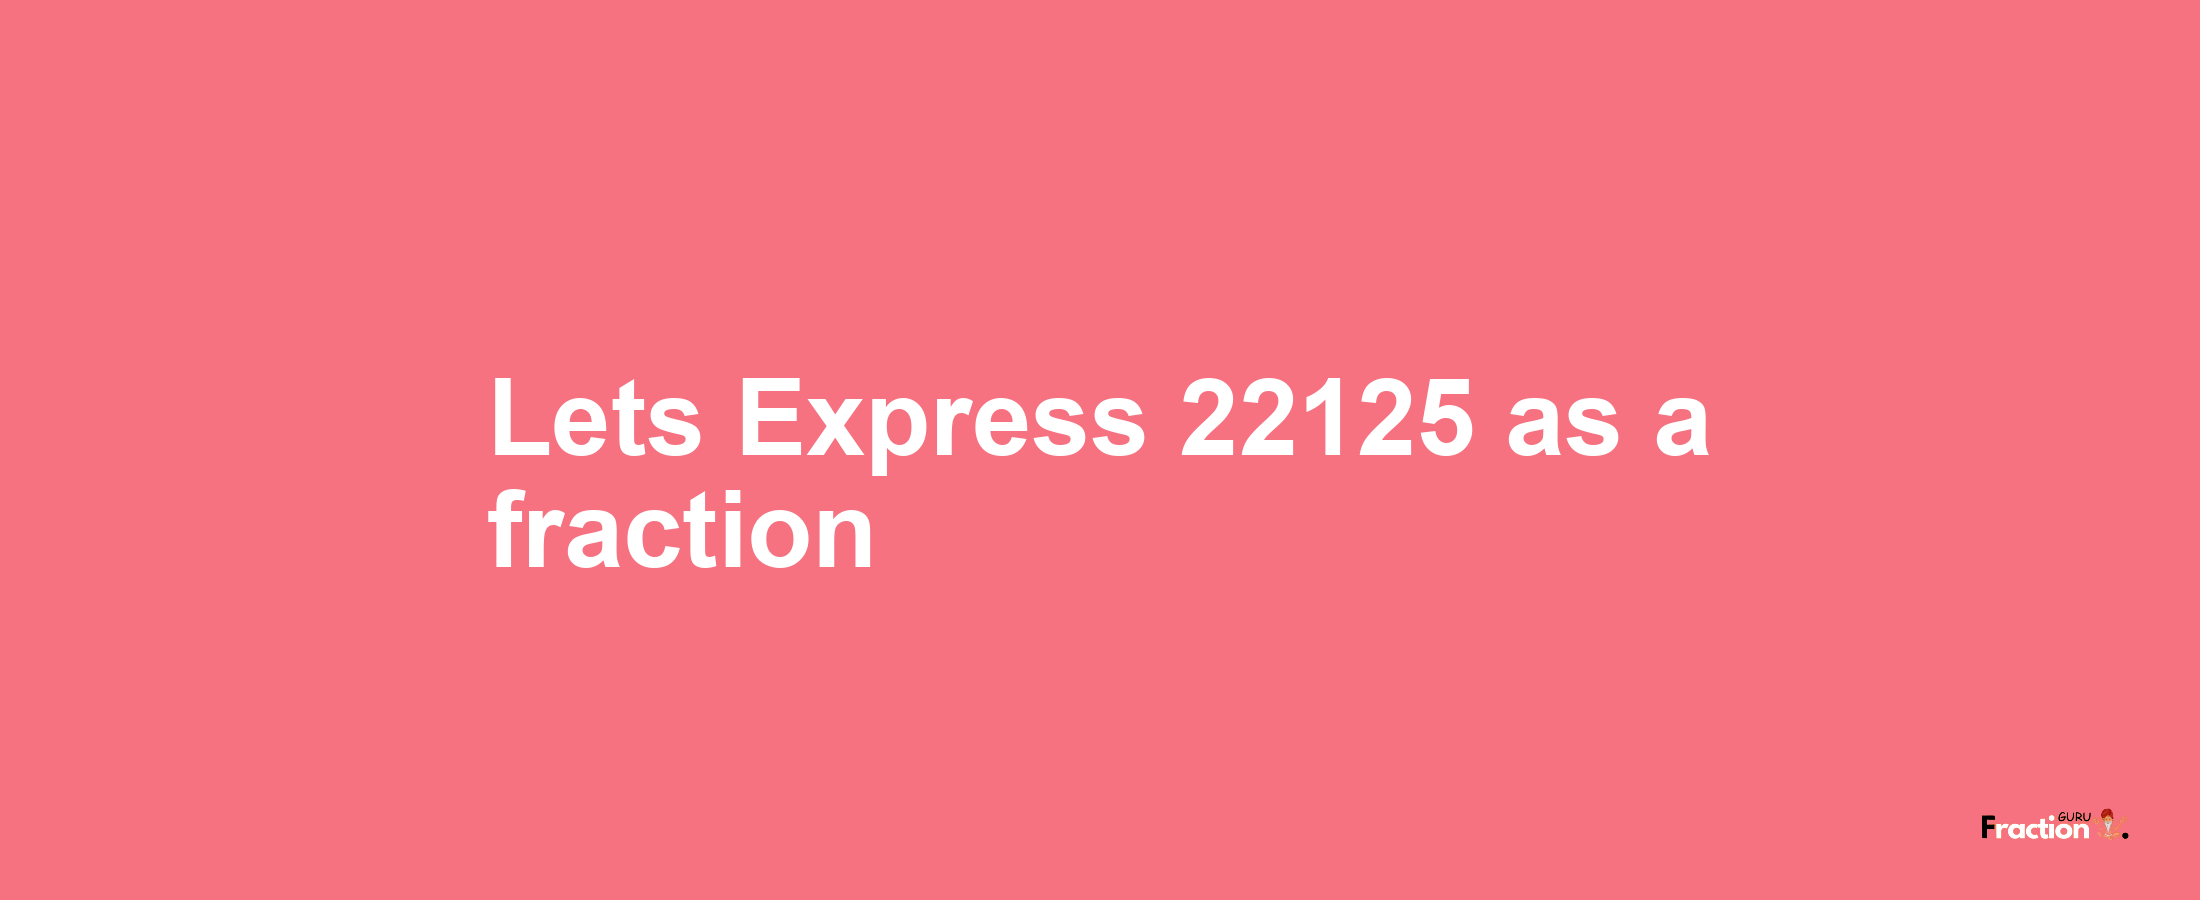 Lets Express 22125 as afraction